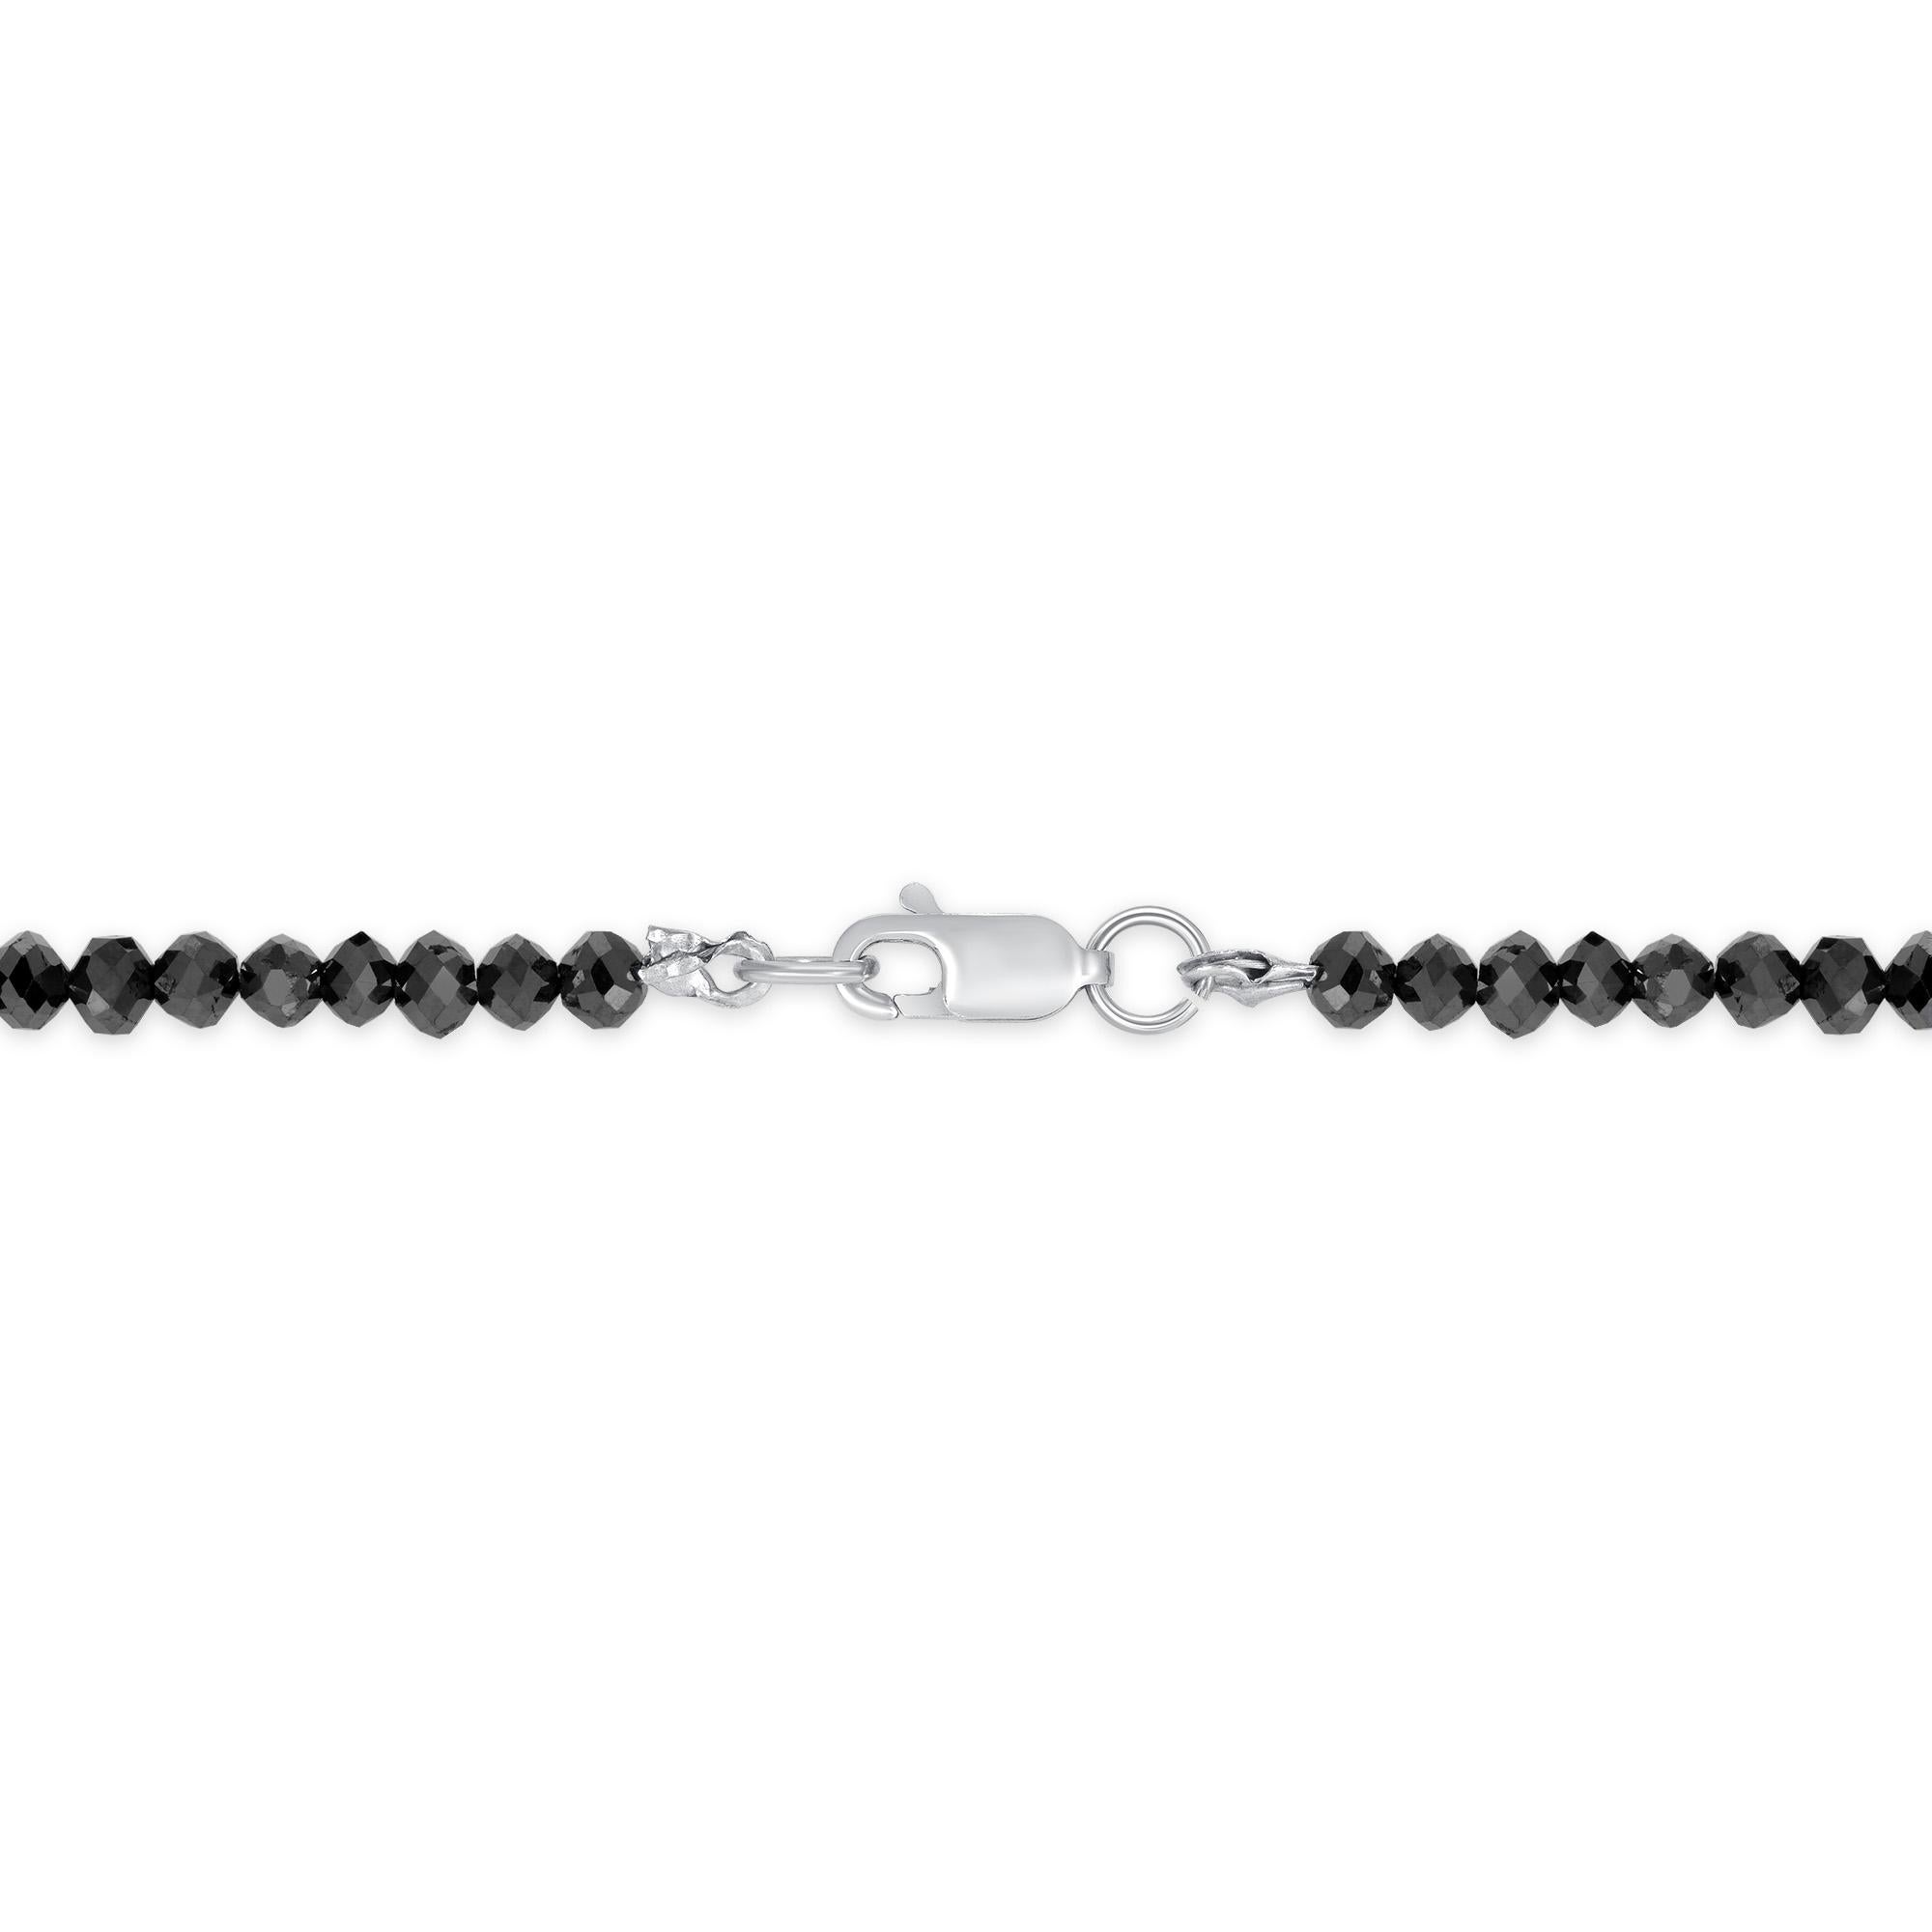 Contemporary 36.72 Carat Black Diamond Briolette Bead Necklace with 14K White Gold Clasp For Sale